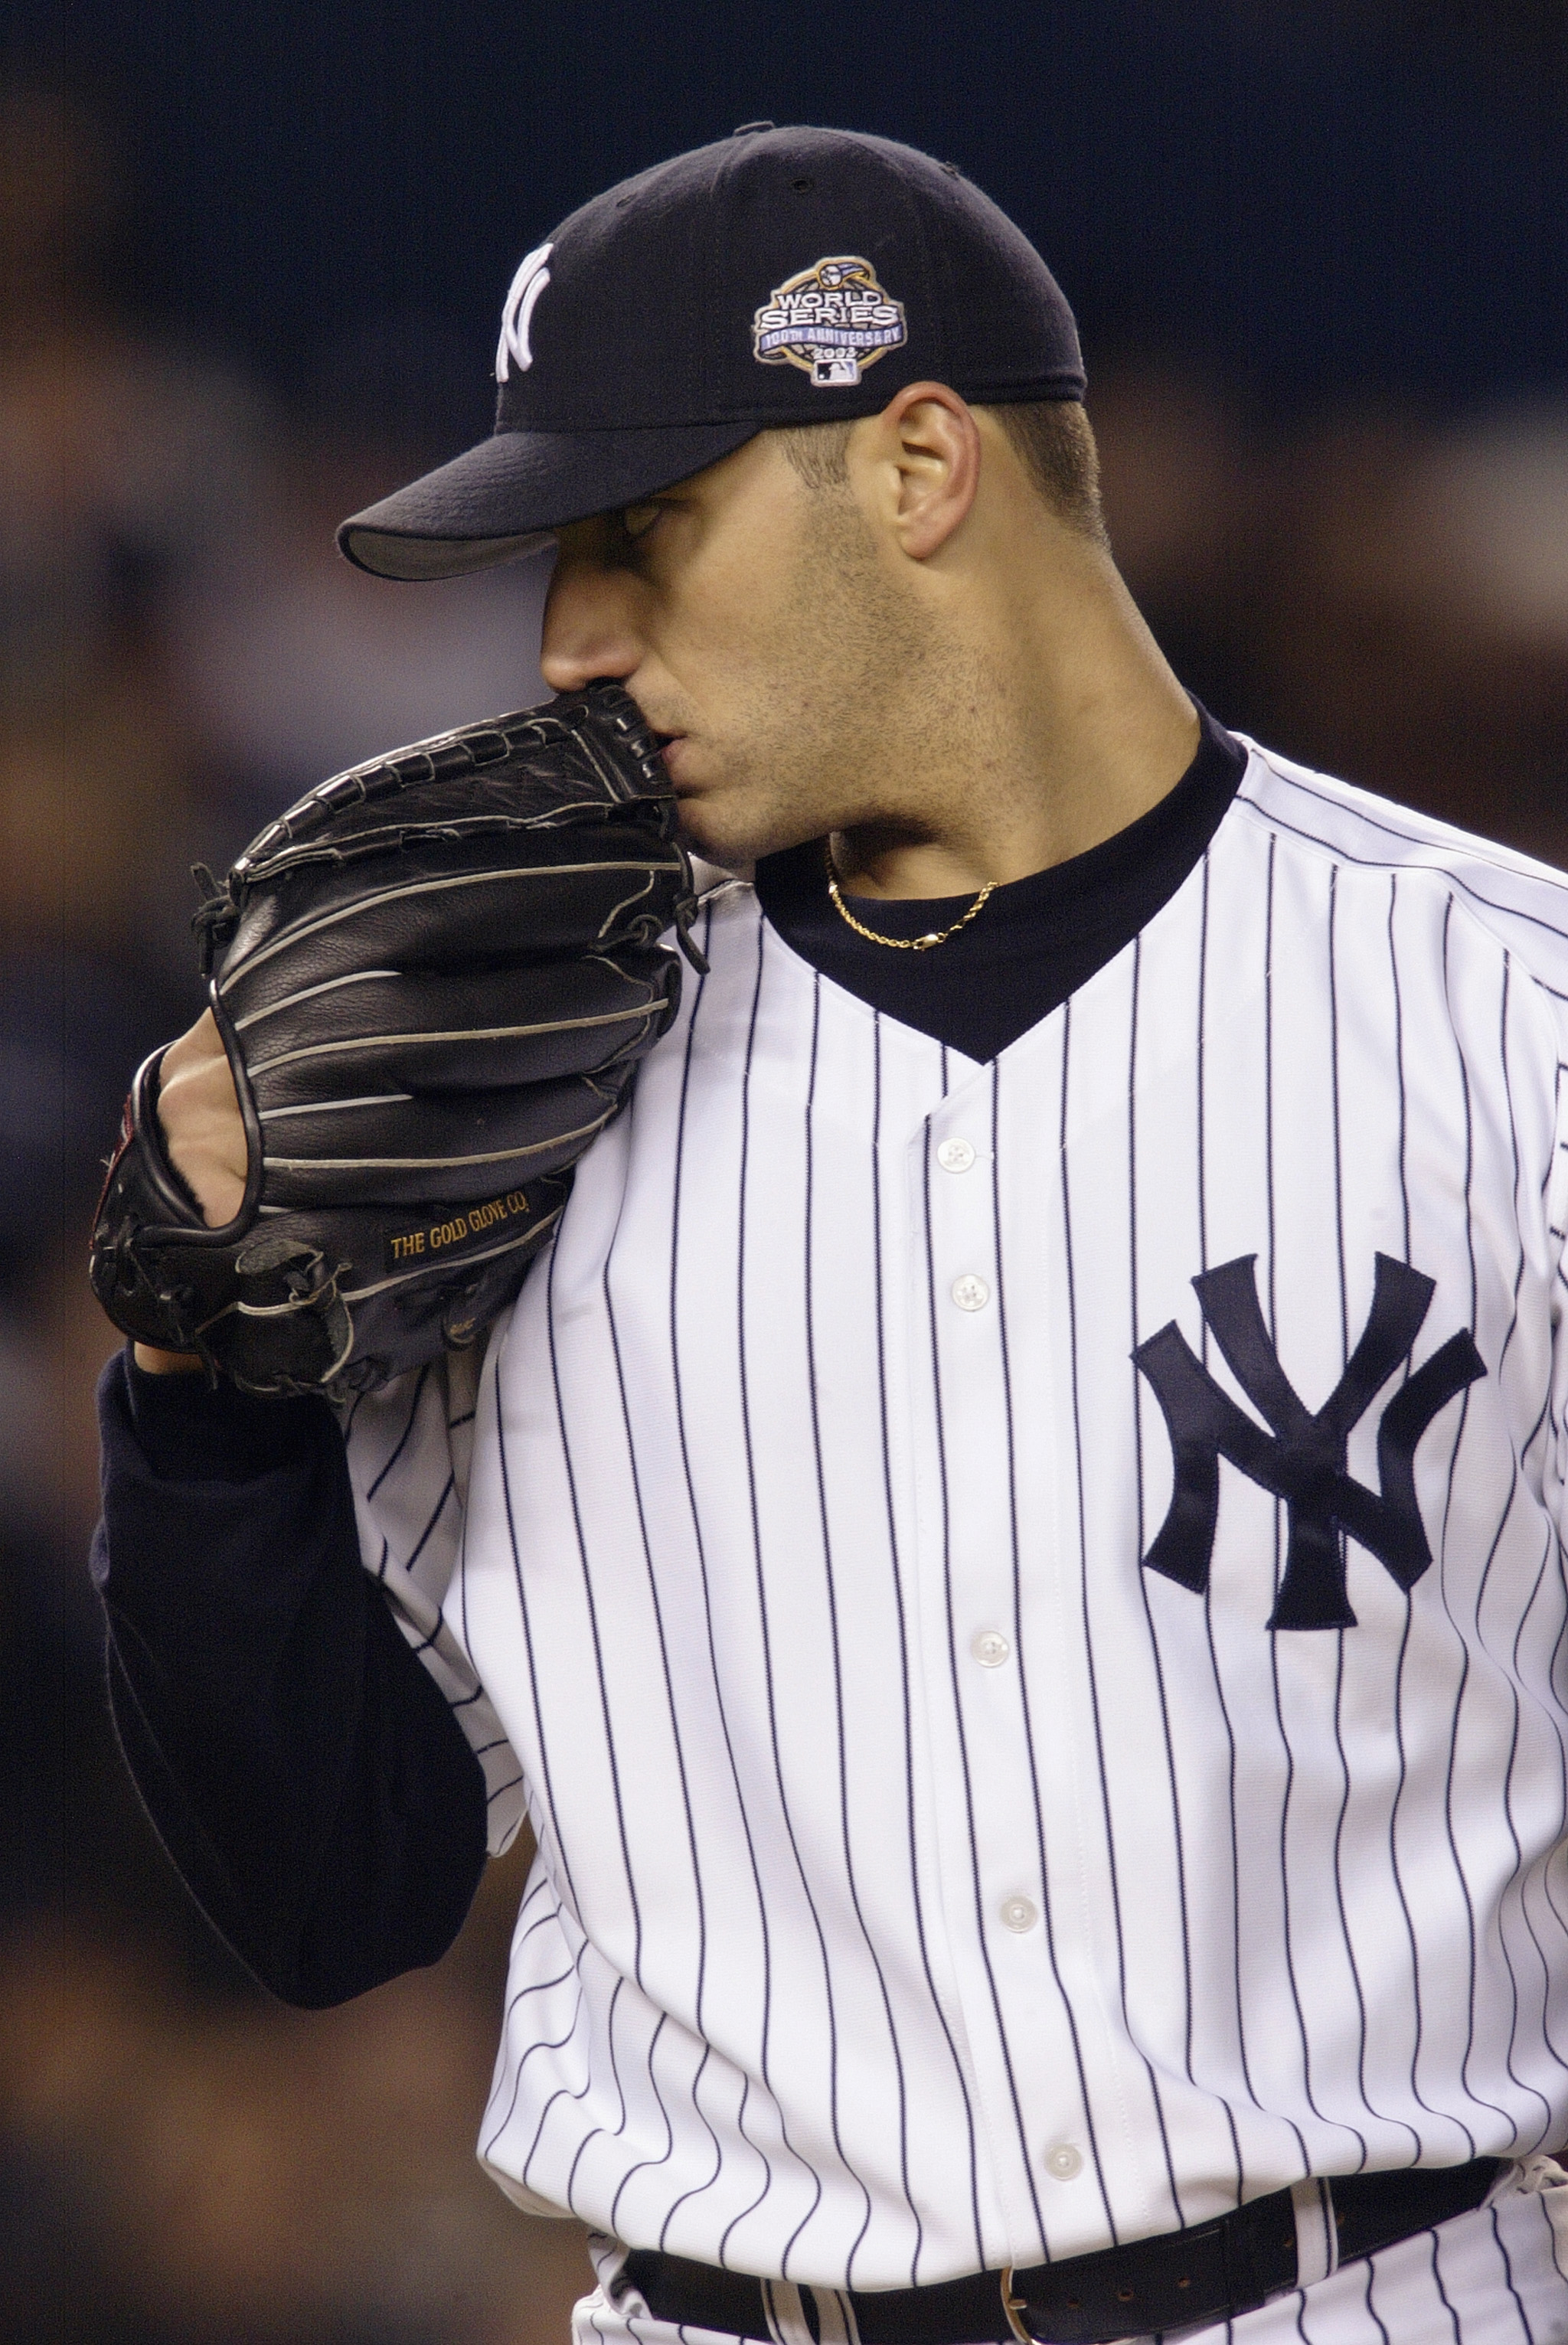 BRONX, NY - OCTOBER 19:  Starting pitcher Andy Pettitte #46 of the New York Yankees stares in at the plate during game 2 of the Major League Baseball World Series against the Florida Marlins on October 19, 2003 at Yankee Stadium in the Bronx, New York.  T